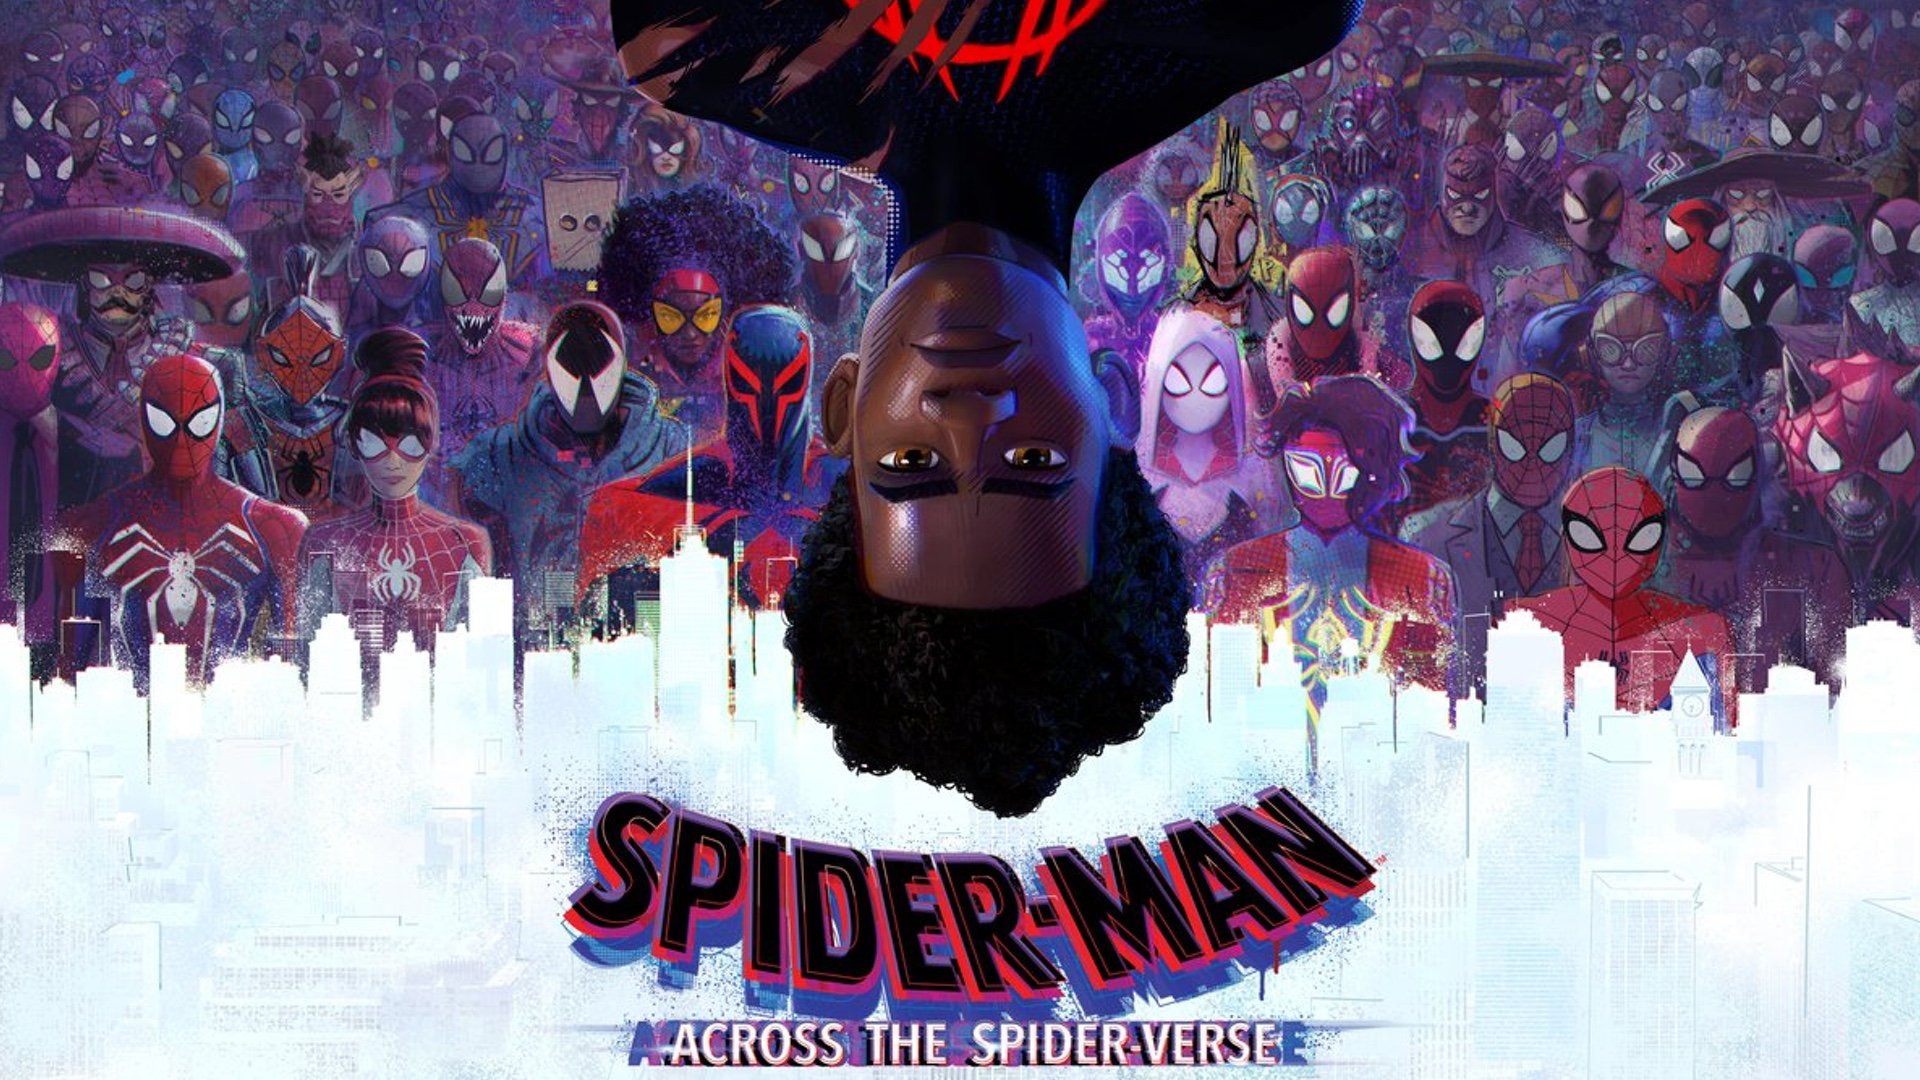 SPIDER MAN: ACROSS THE SPIDER VERSE Banner Features An Epic Number Of Spider People